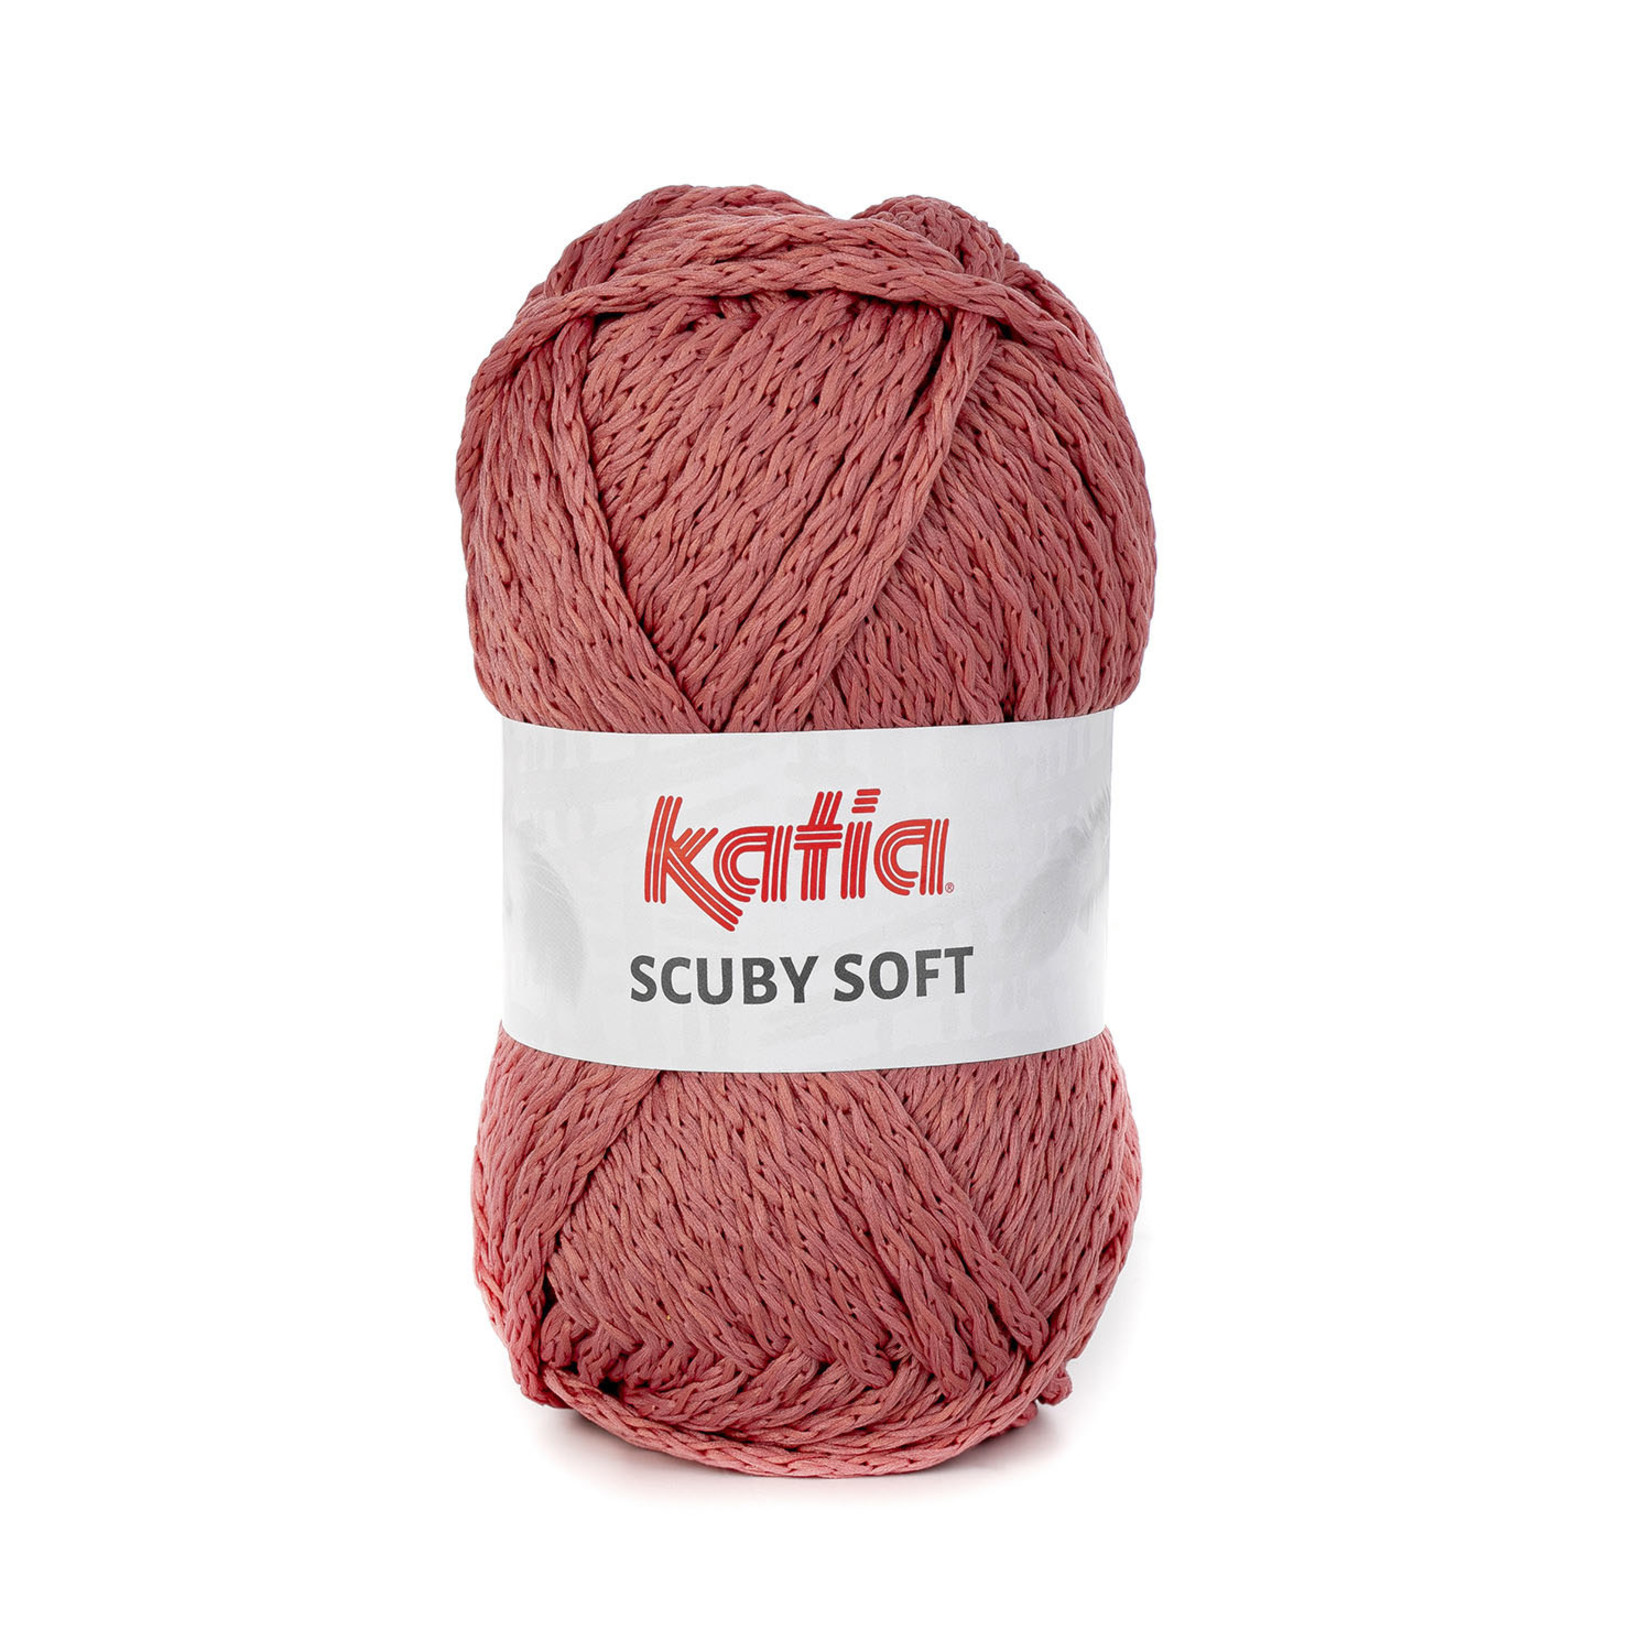 Katia Scuby Soft 303 Roos